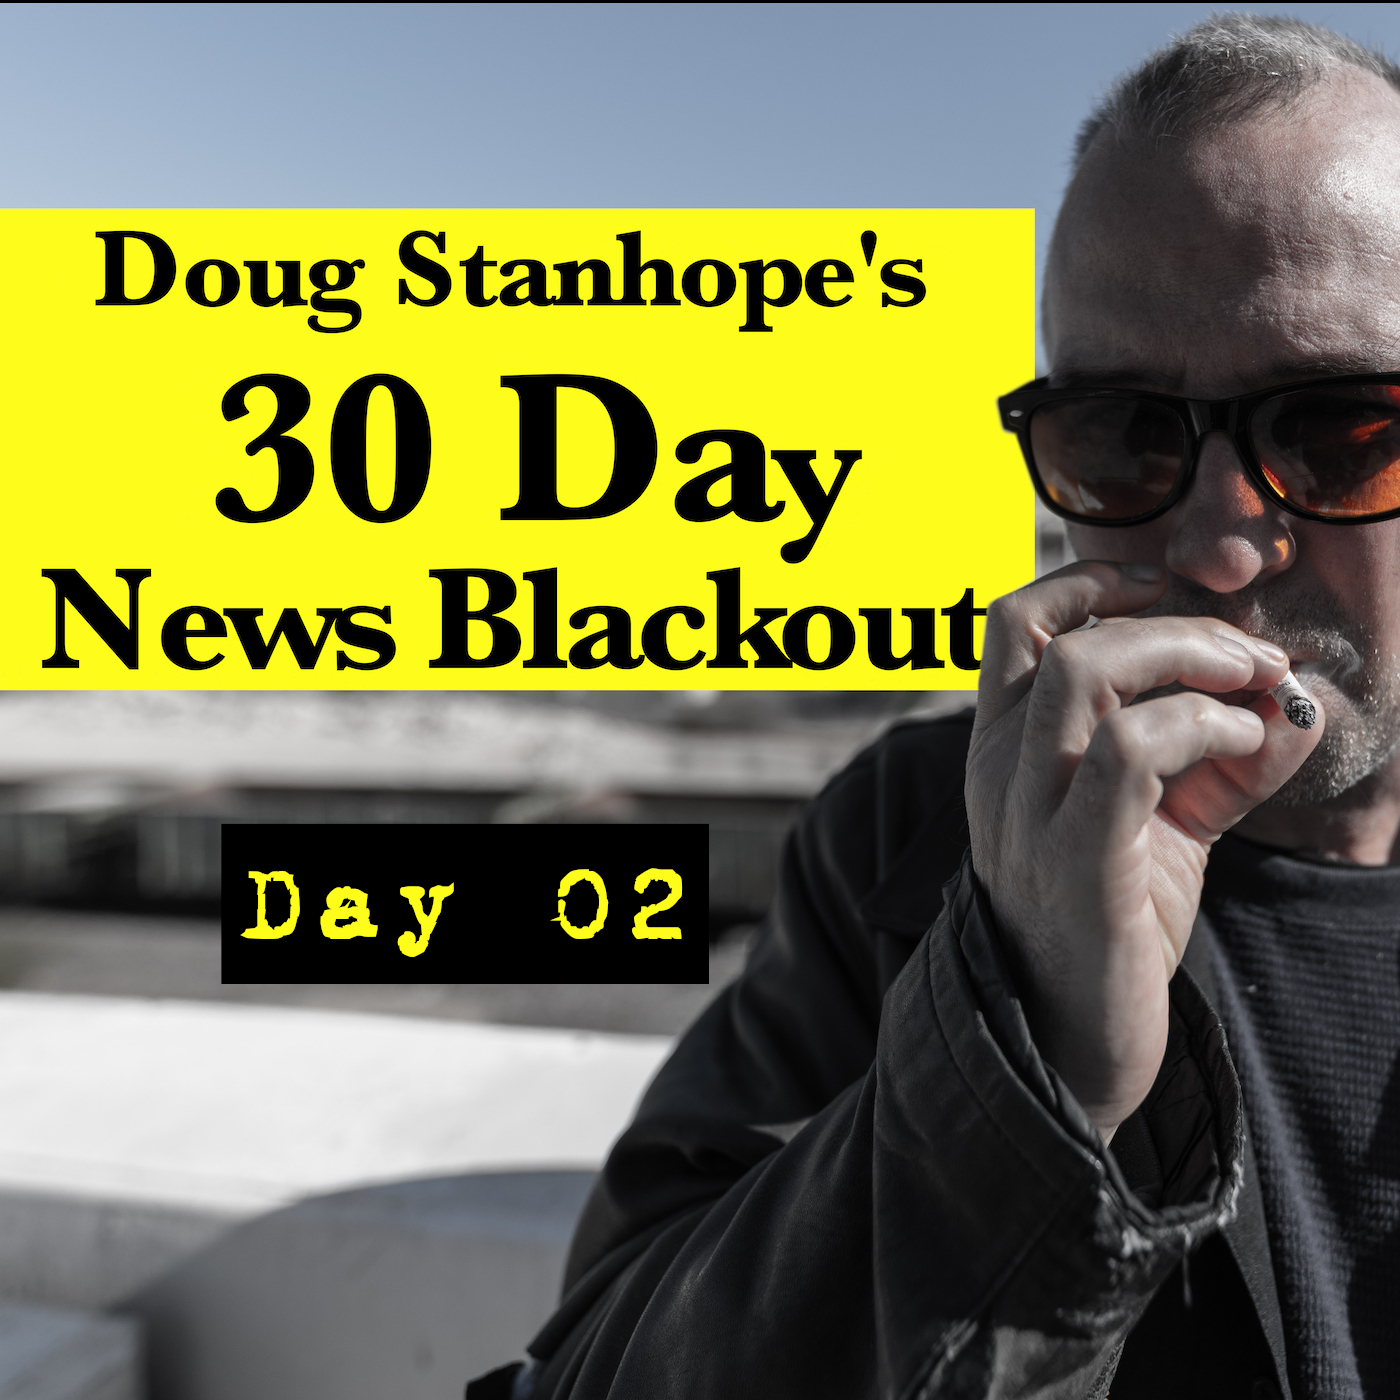 Ep.#365: Day 02 - Stanhope's 30 Day News Blackout